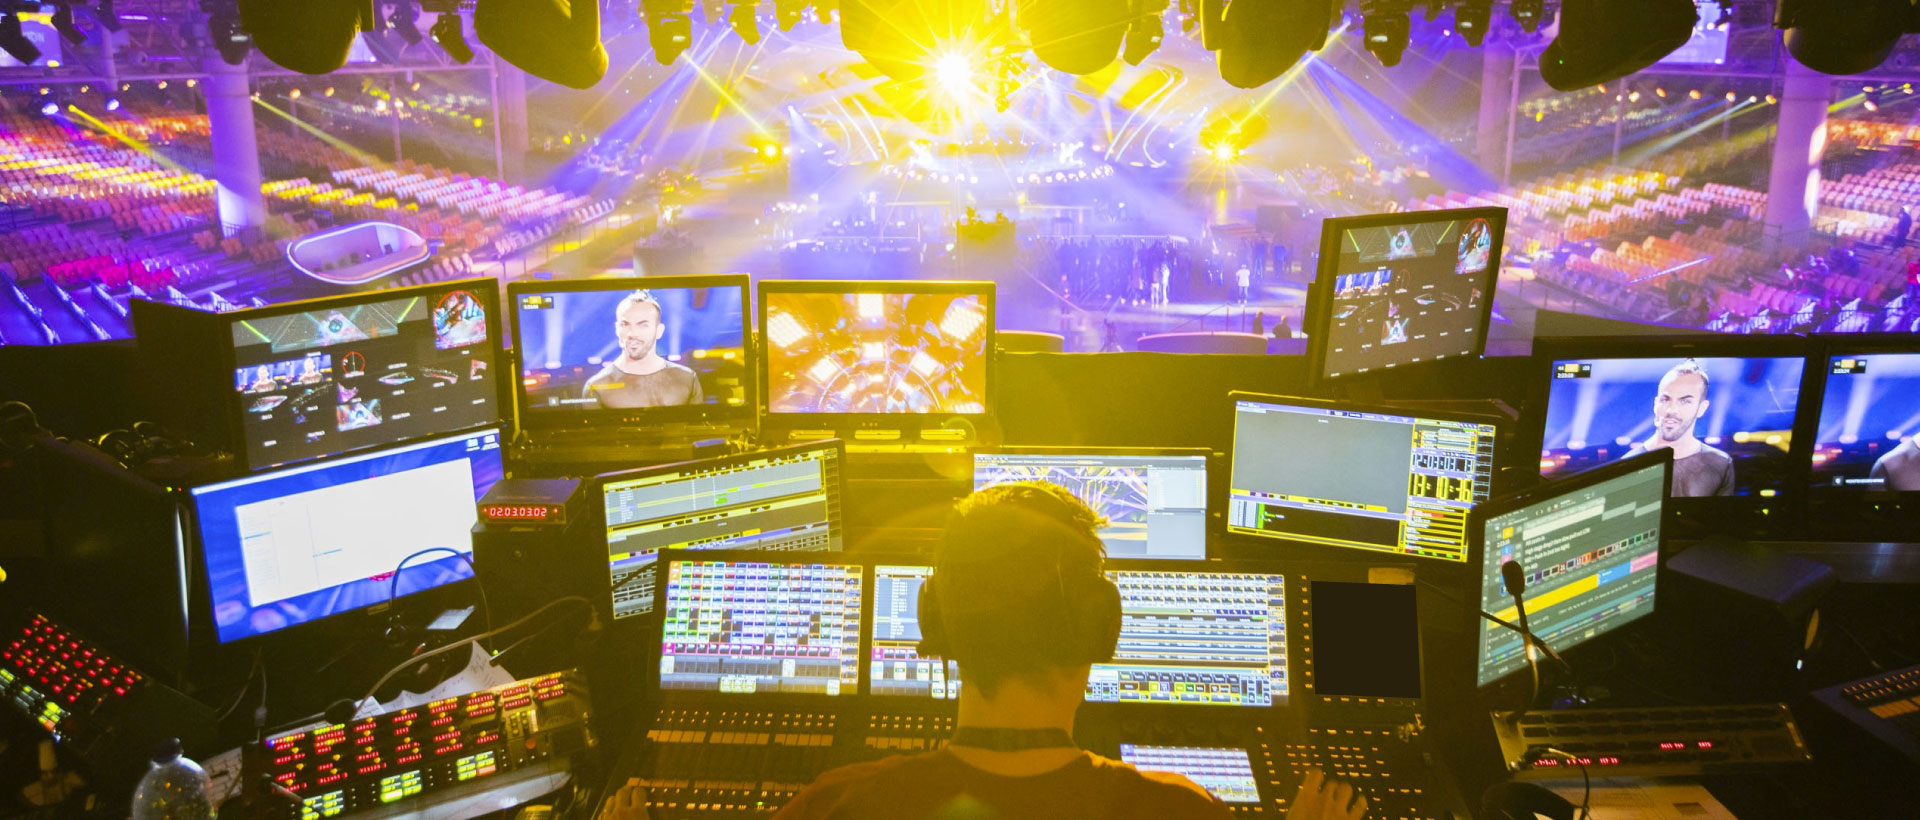 The best crew for all jobs - lighting, audio, rigging, video and much more